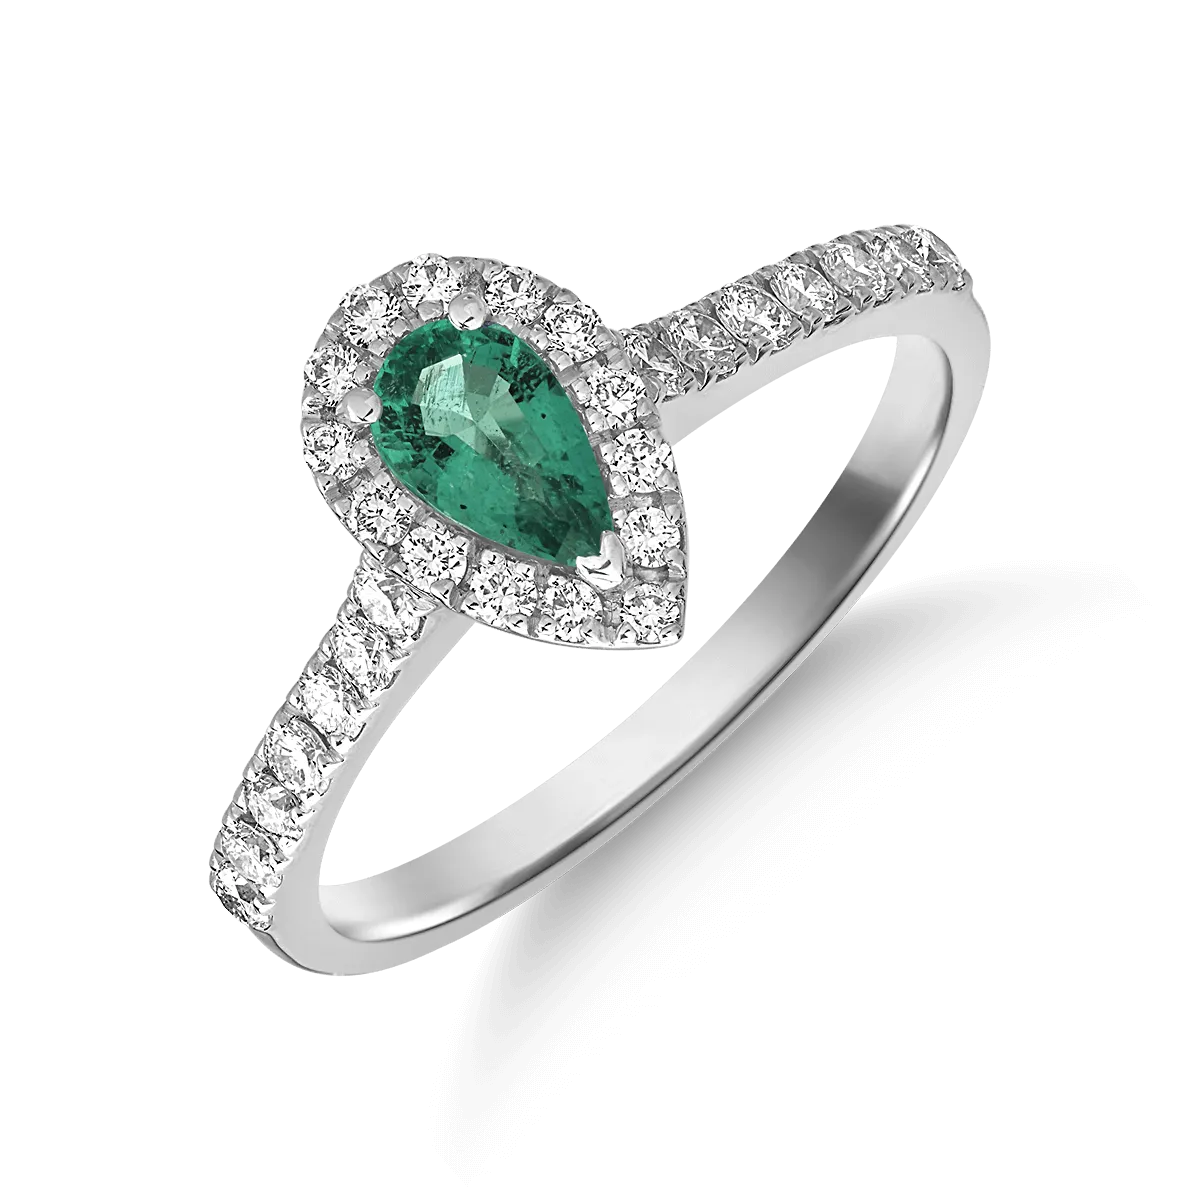 18K white gold ring with 0.33ct emerald and 0.38ct diamonds